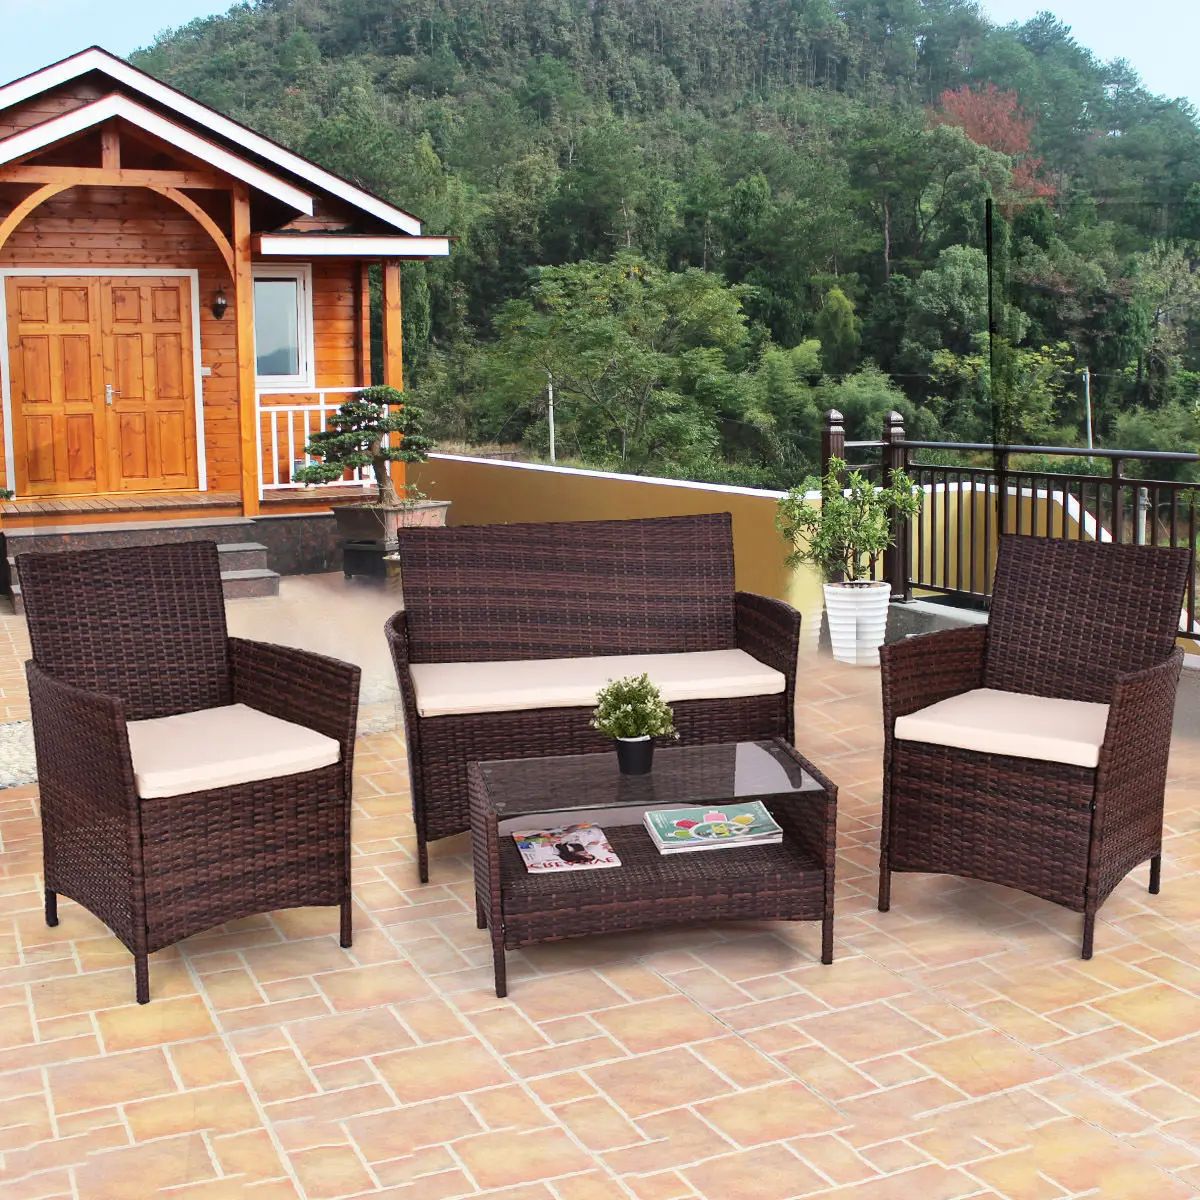 Giantex 4pcs Outdoor Patio Pe Rattan Wicker Coffee Table Shelf Modern Intended For 4pcs Rattan Patio Coffee Tables (Gallery 5 of 20)